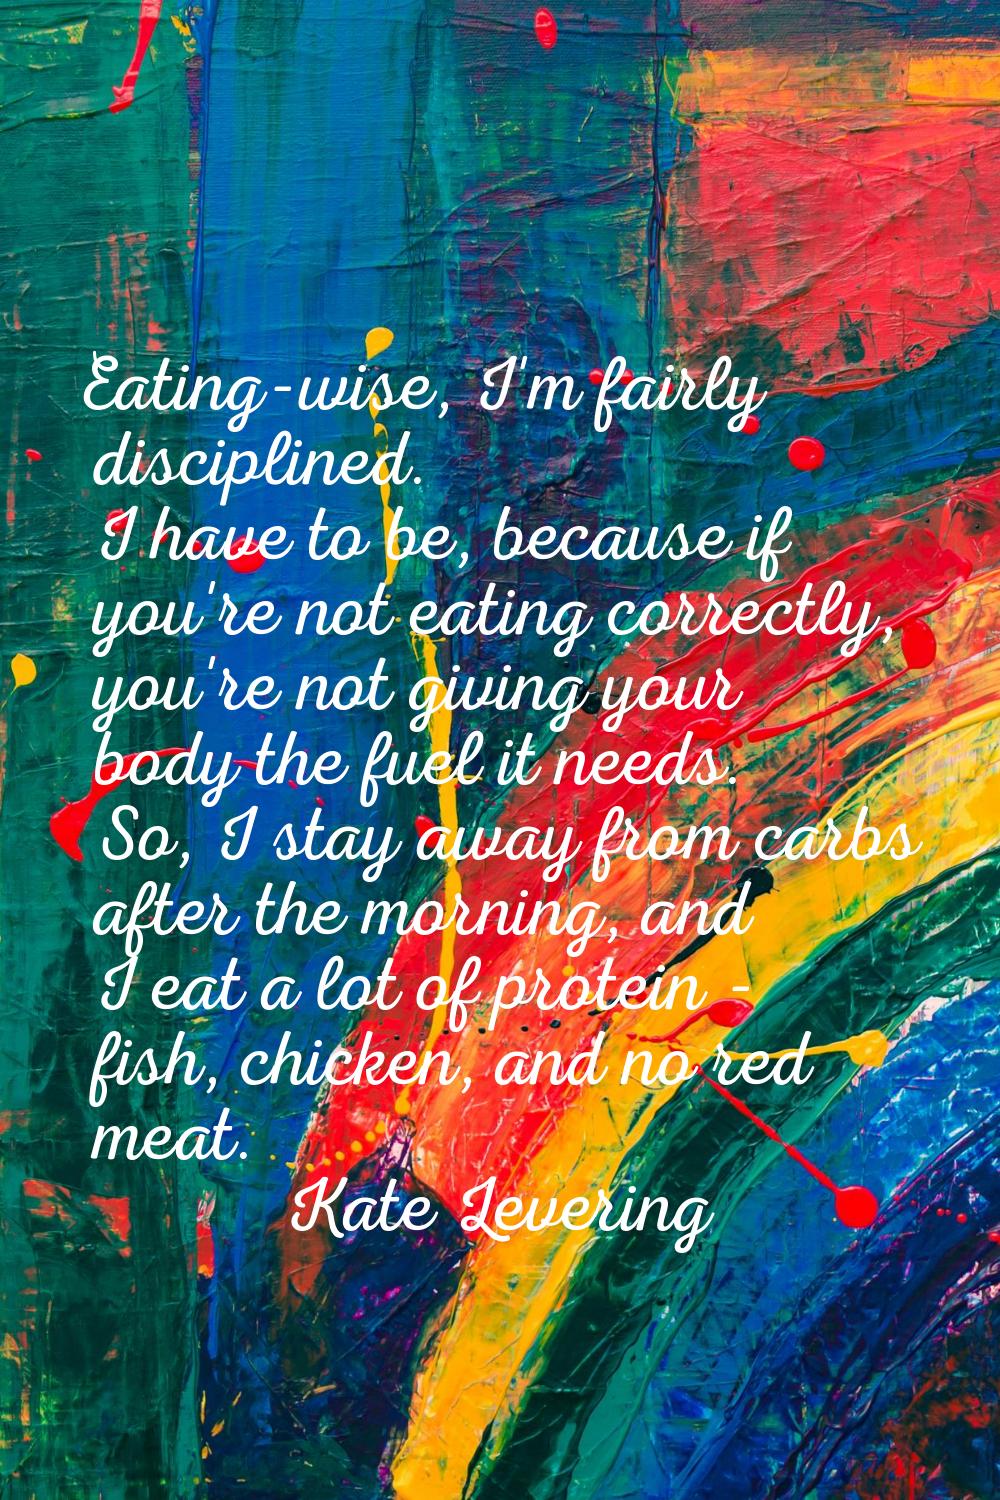 Eating-wise, I'm fairly disciplined. I have to be, because if you're not eating correctly, you're n